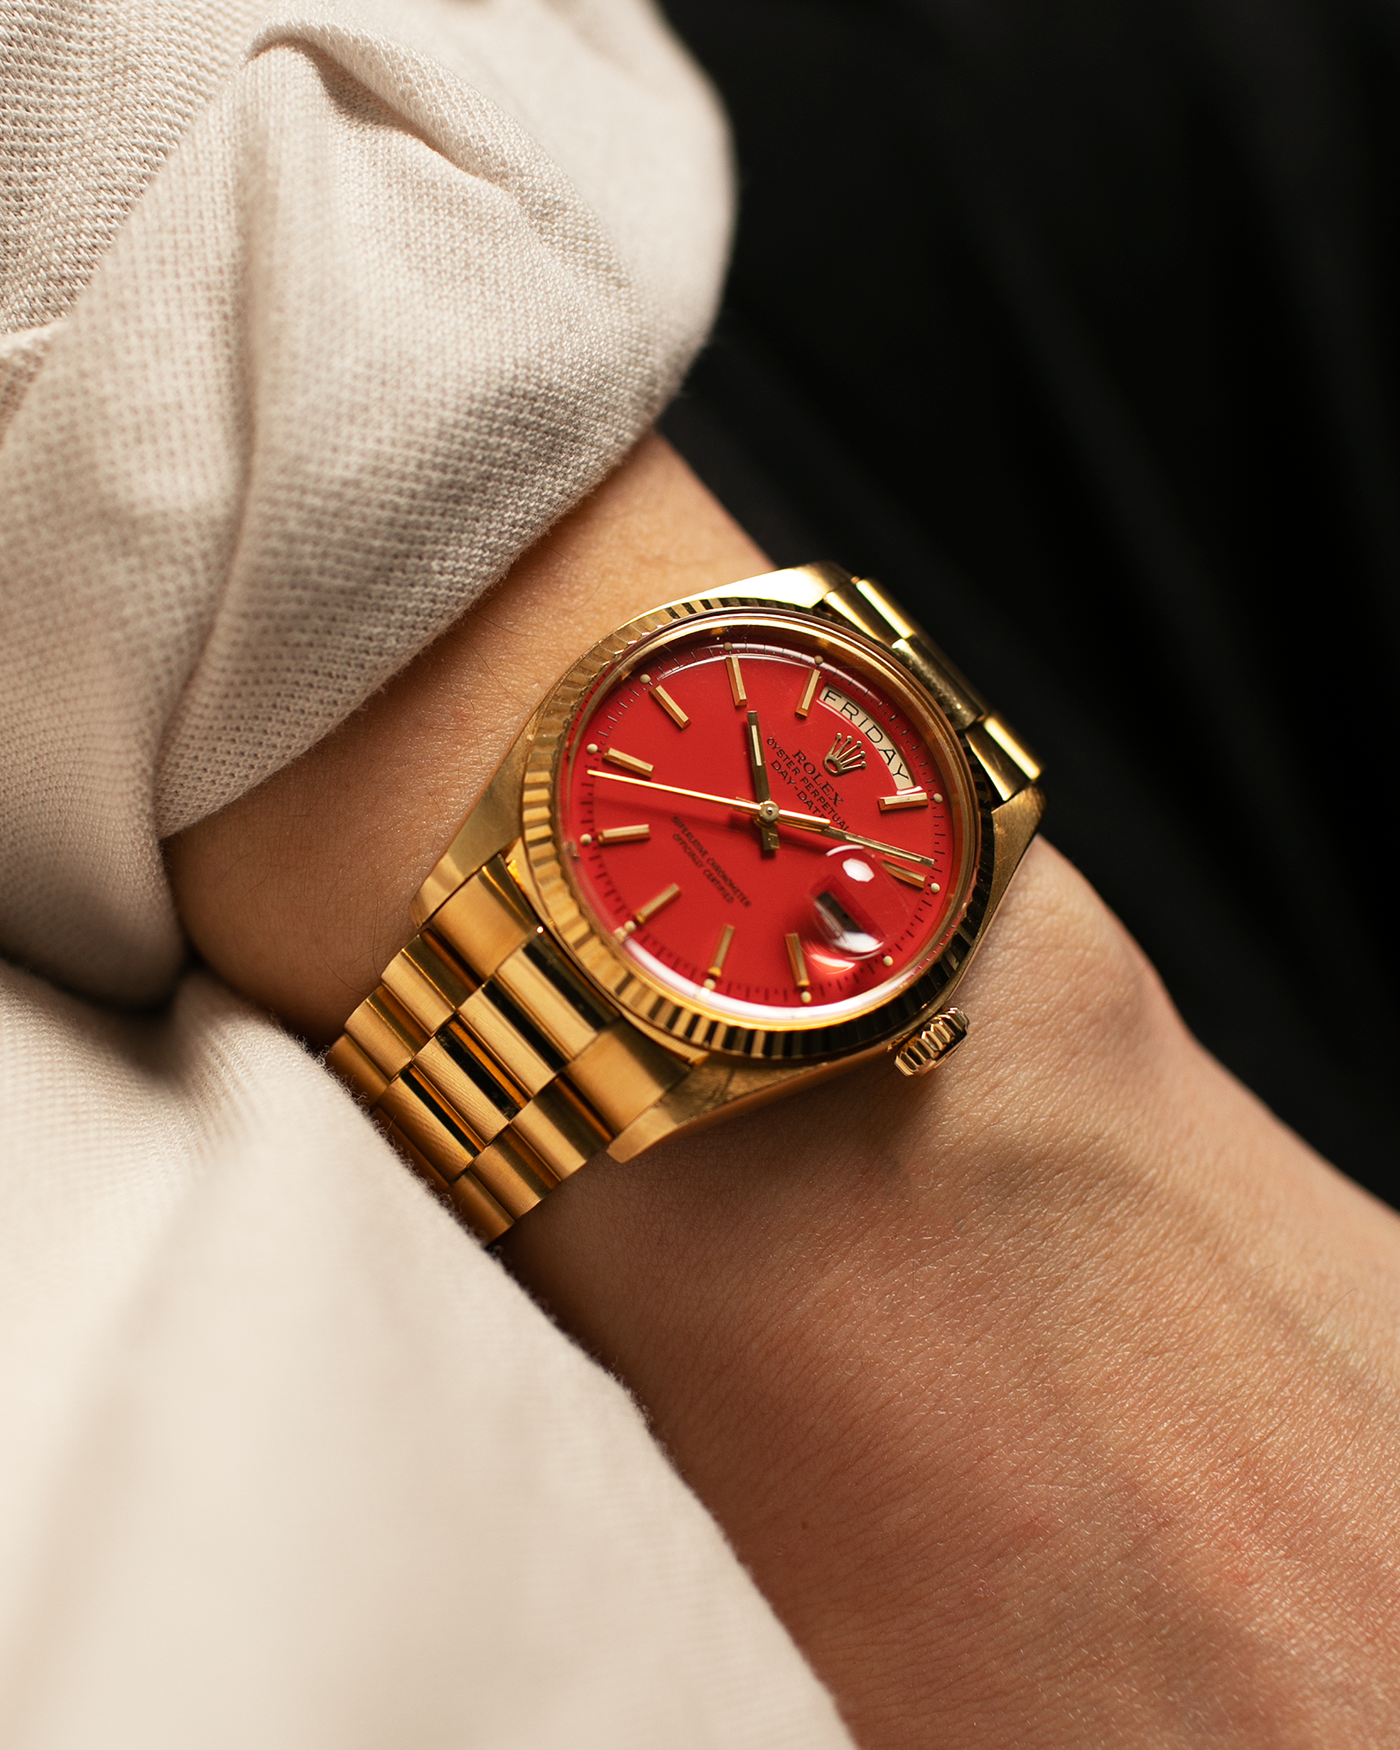 Brand: Rolex Year: 1978 Model: Day-Date, Coral Red ‘Stella’ Reference Number: 1803 Serial: 510XXXX Material: 18-carat Yellow Gold Movement: Rolex Cal. 1556, Self-Winding Case Diameter: 36mm Lug Width: 20mm Bracelet: Rolex 18-carat Yellow Gold ‘F18000’ Stamped Presidential Bracelet with ‘55’ Curved End Links